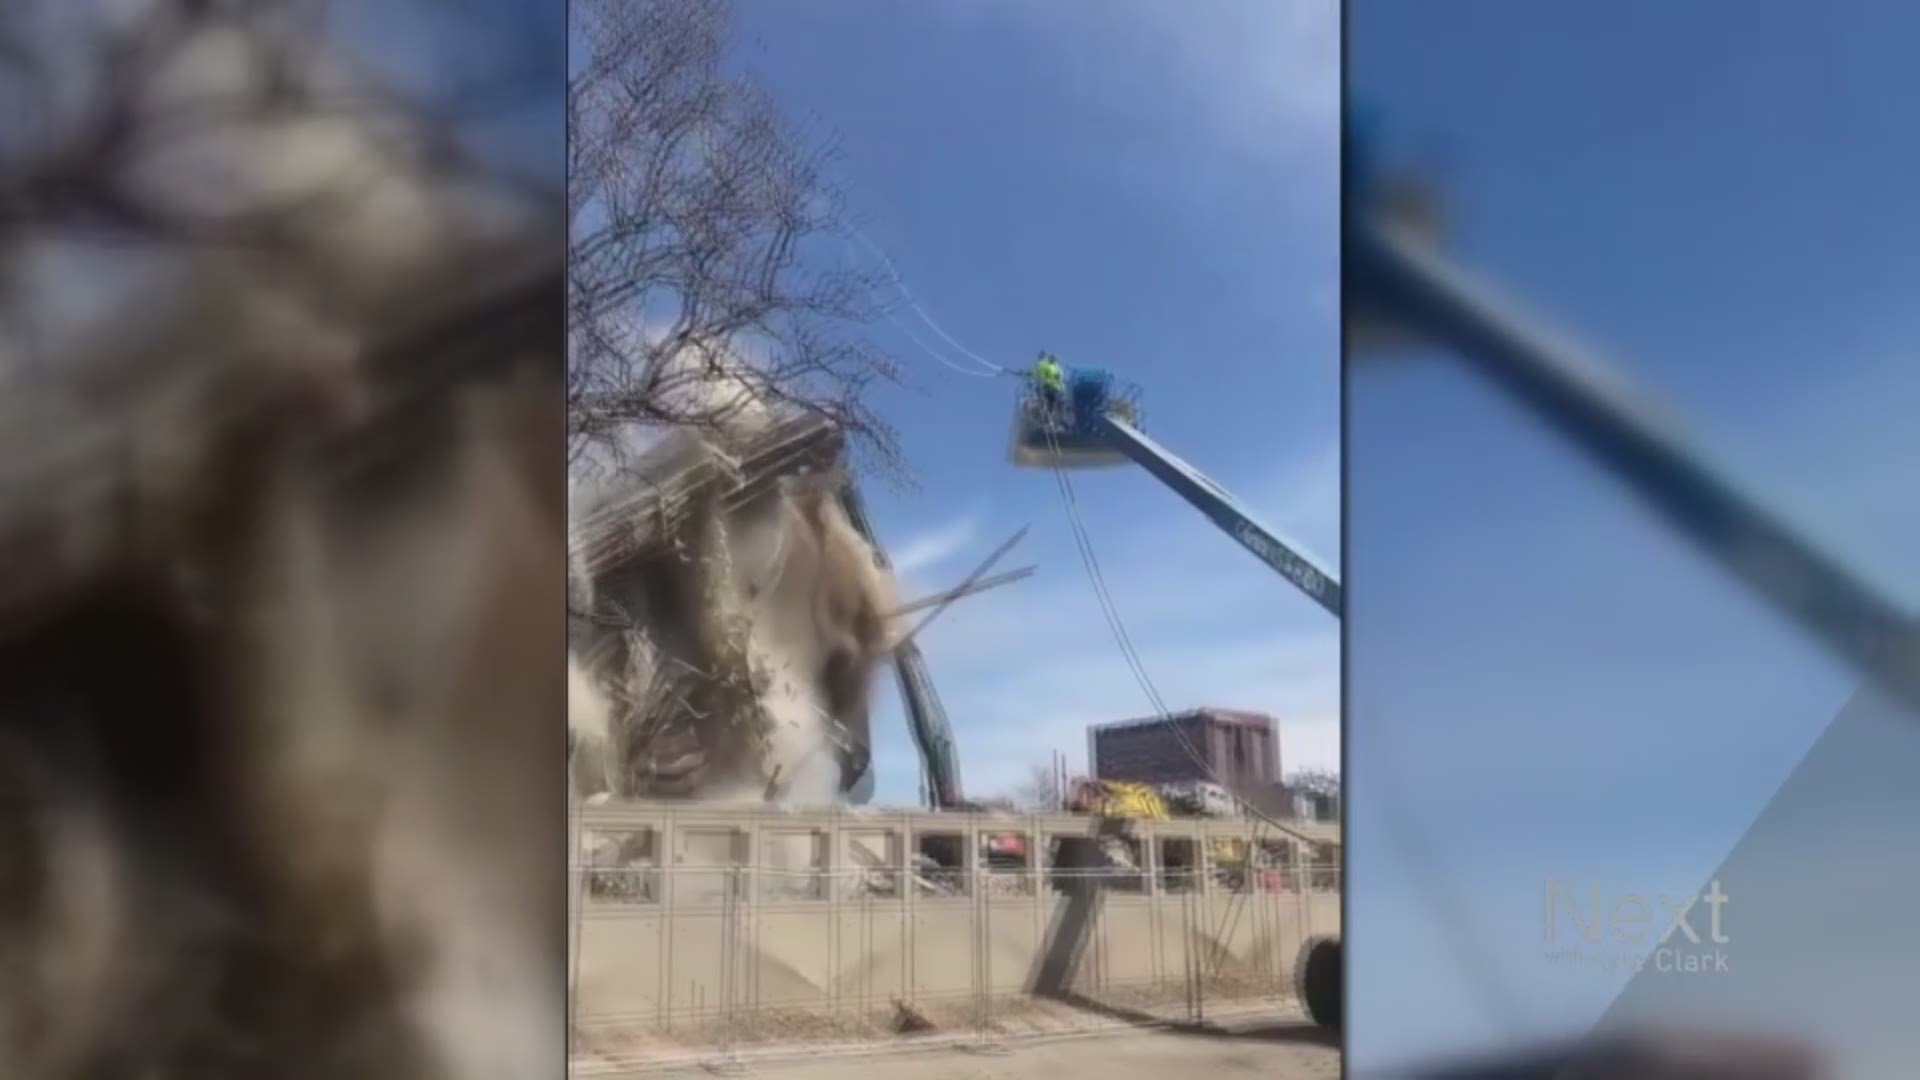 The city of Denver's Community Planning and Development Department said that it wasn't notified and that the building in the Golden Triangle neighborhood wasn't supposed to collapse all at once.